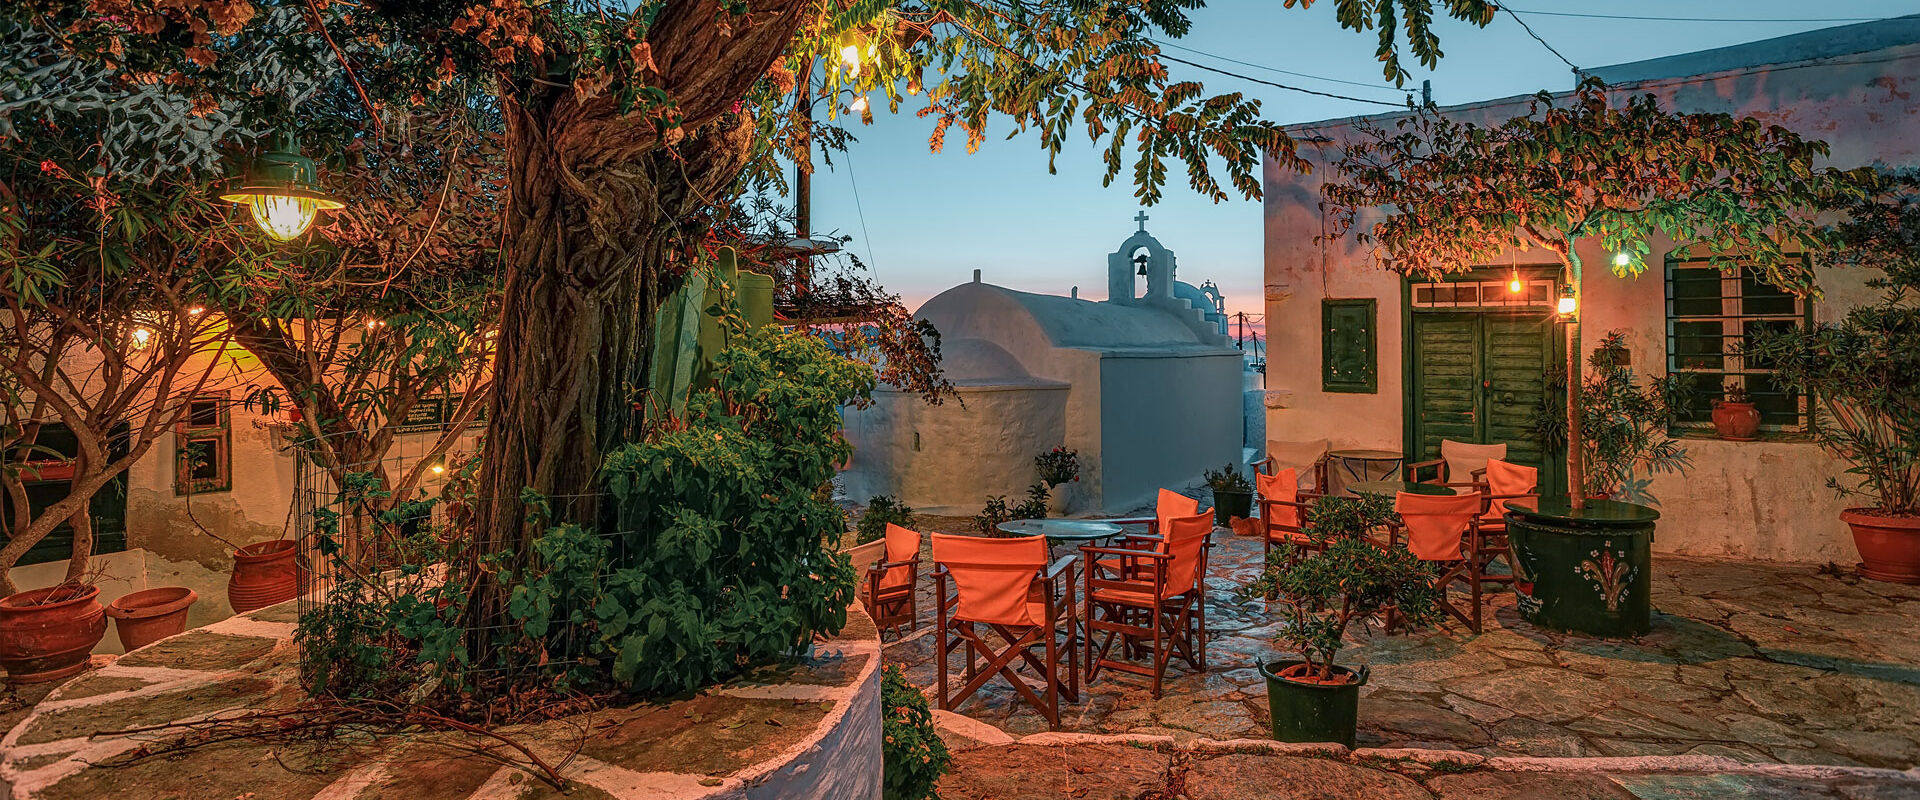 Small traditional paved square at dusk, Hora Amorgos